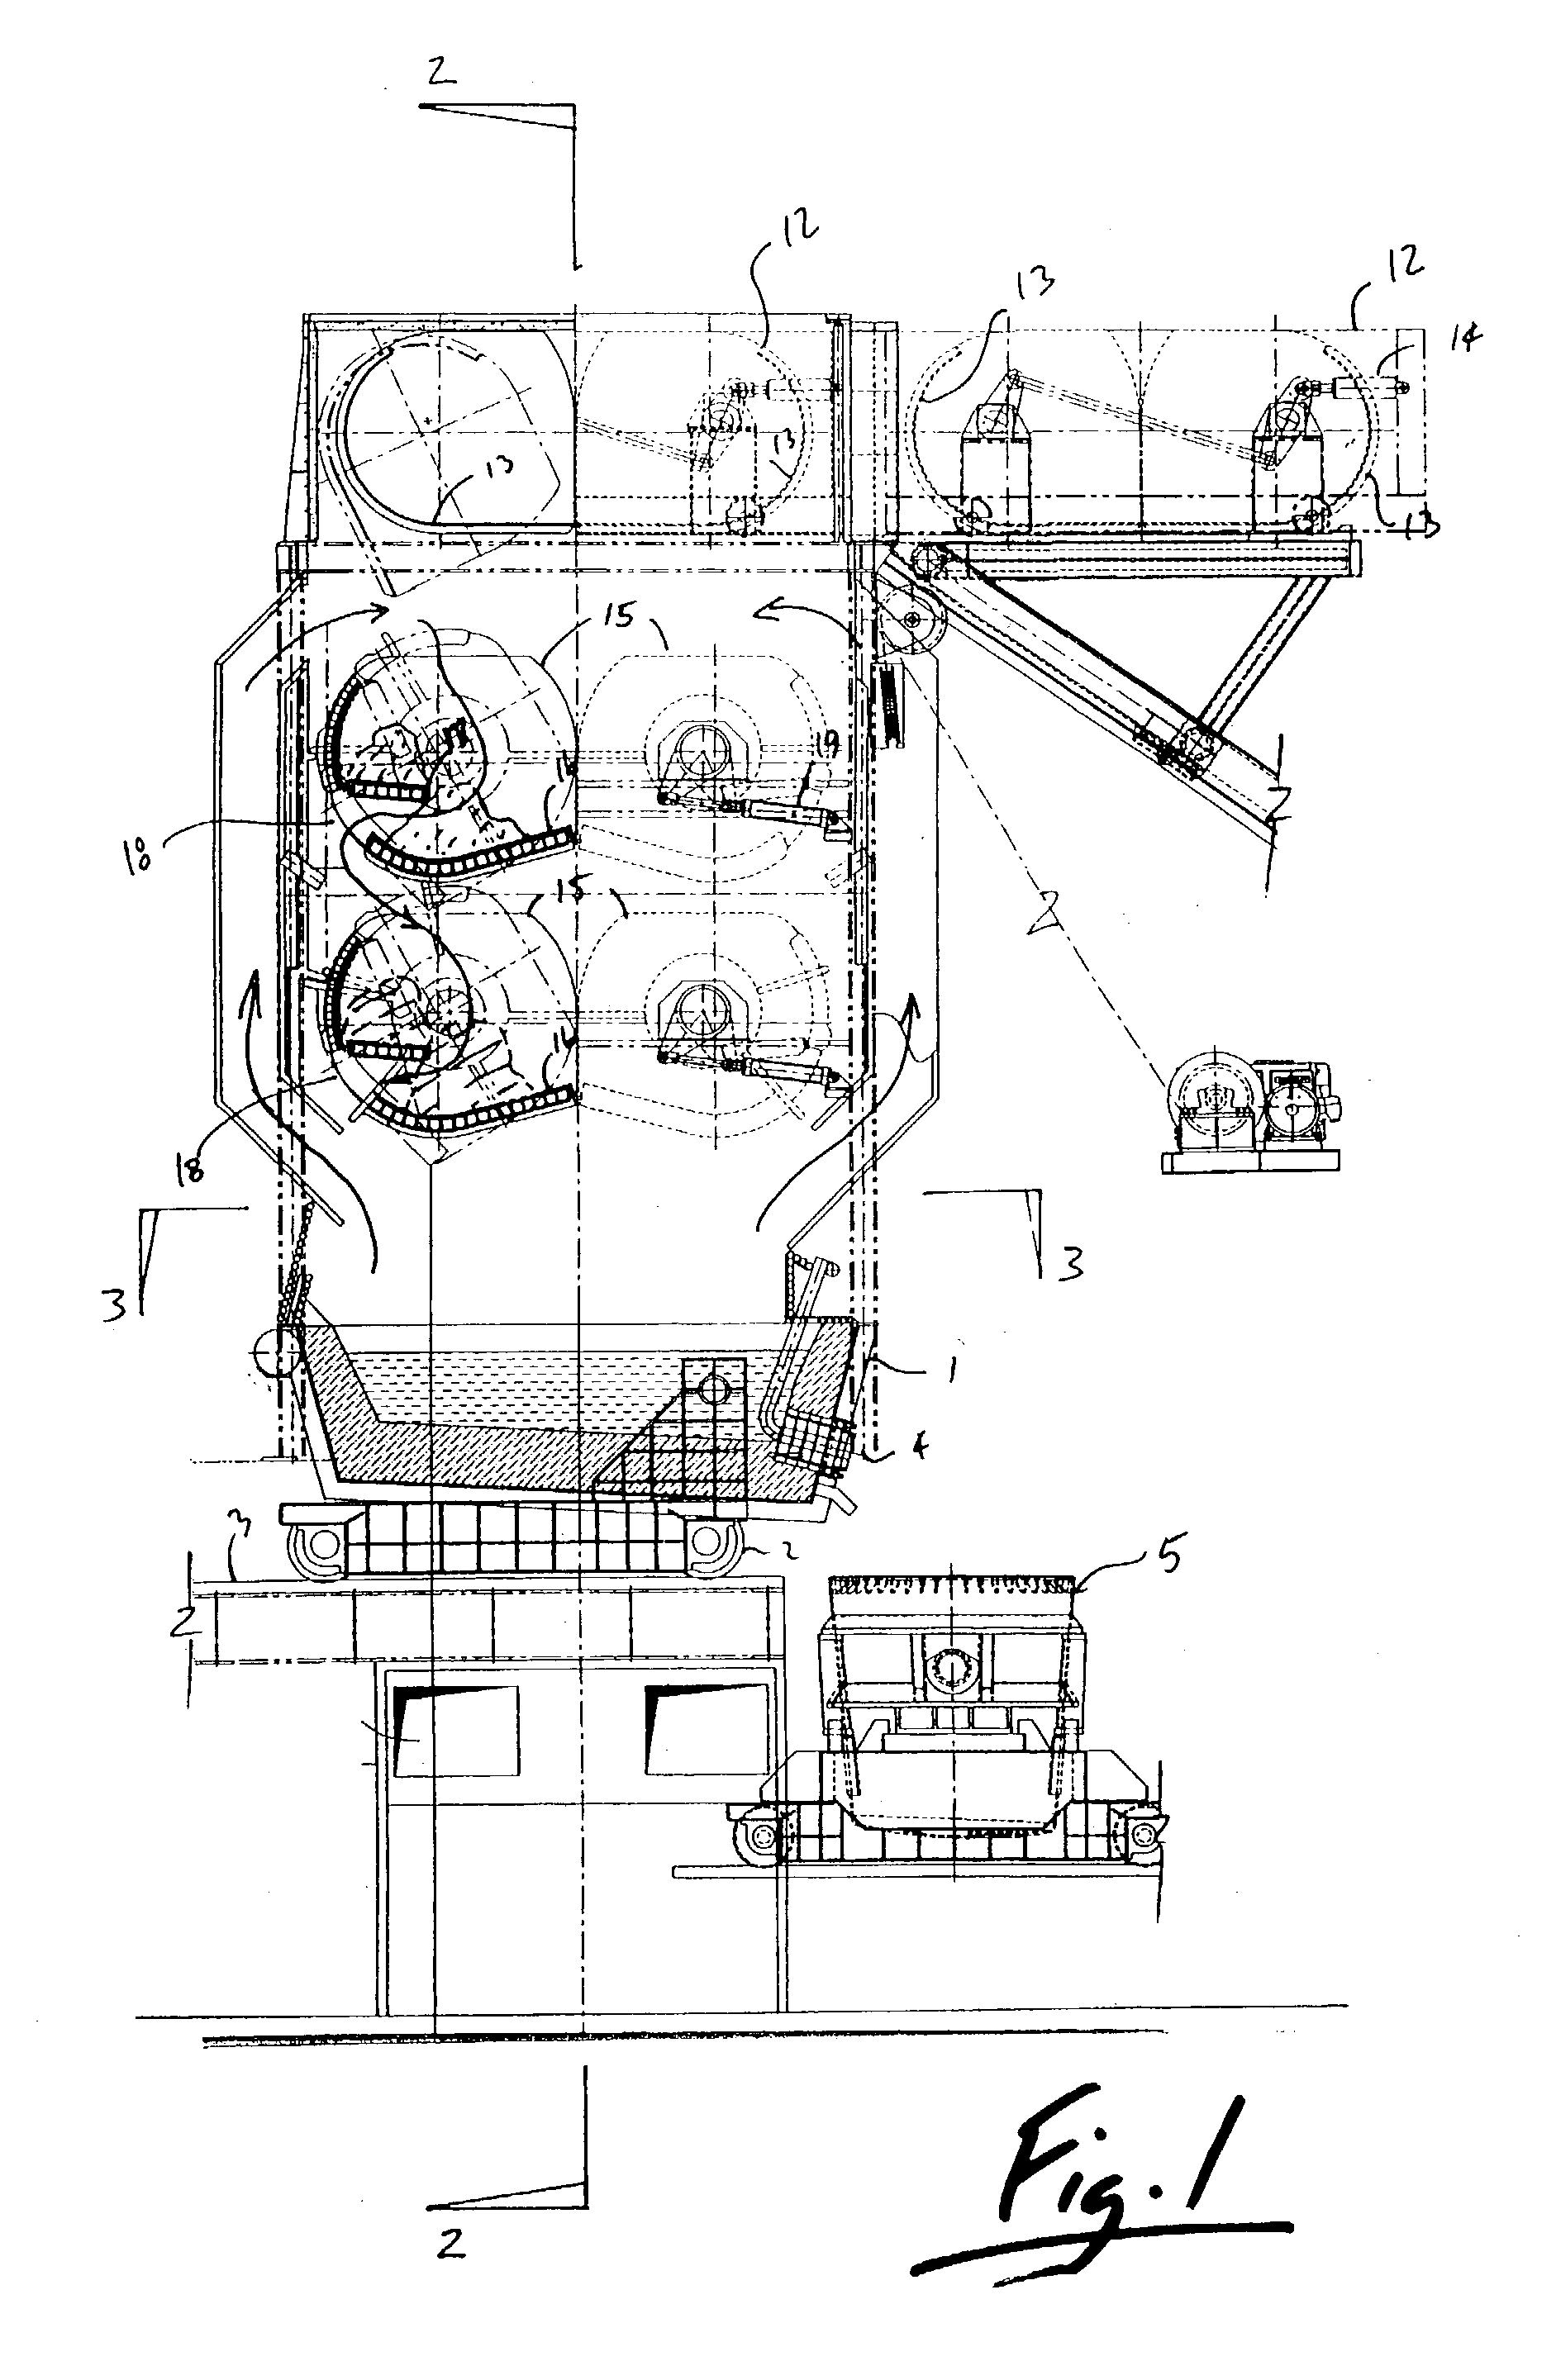 Metallurgical furnace with scrap metal preheater and dispenser